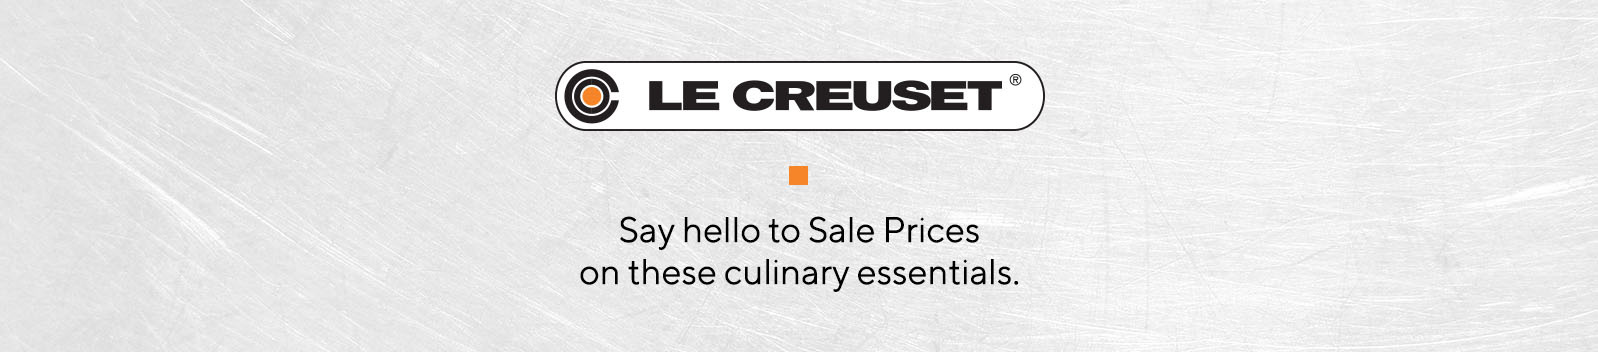 Le Creuset Say hello to Sale Prices on these culinary essentials.